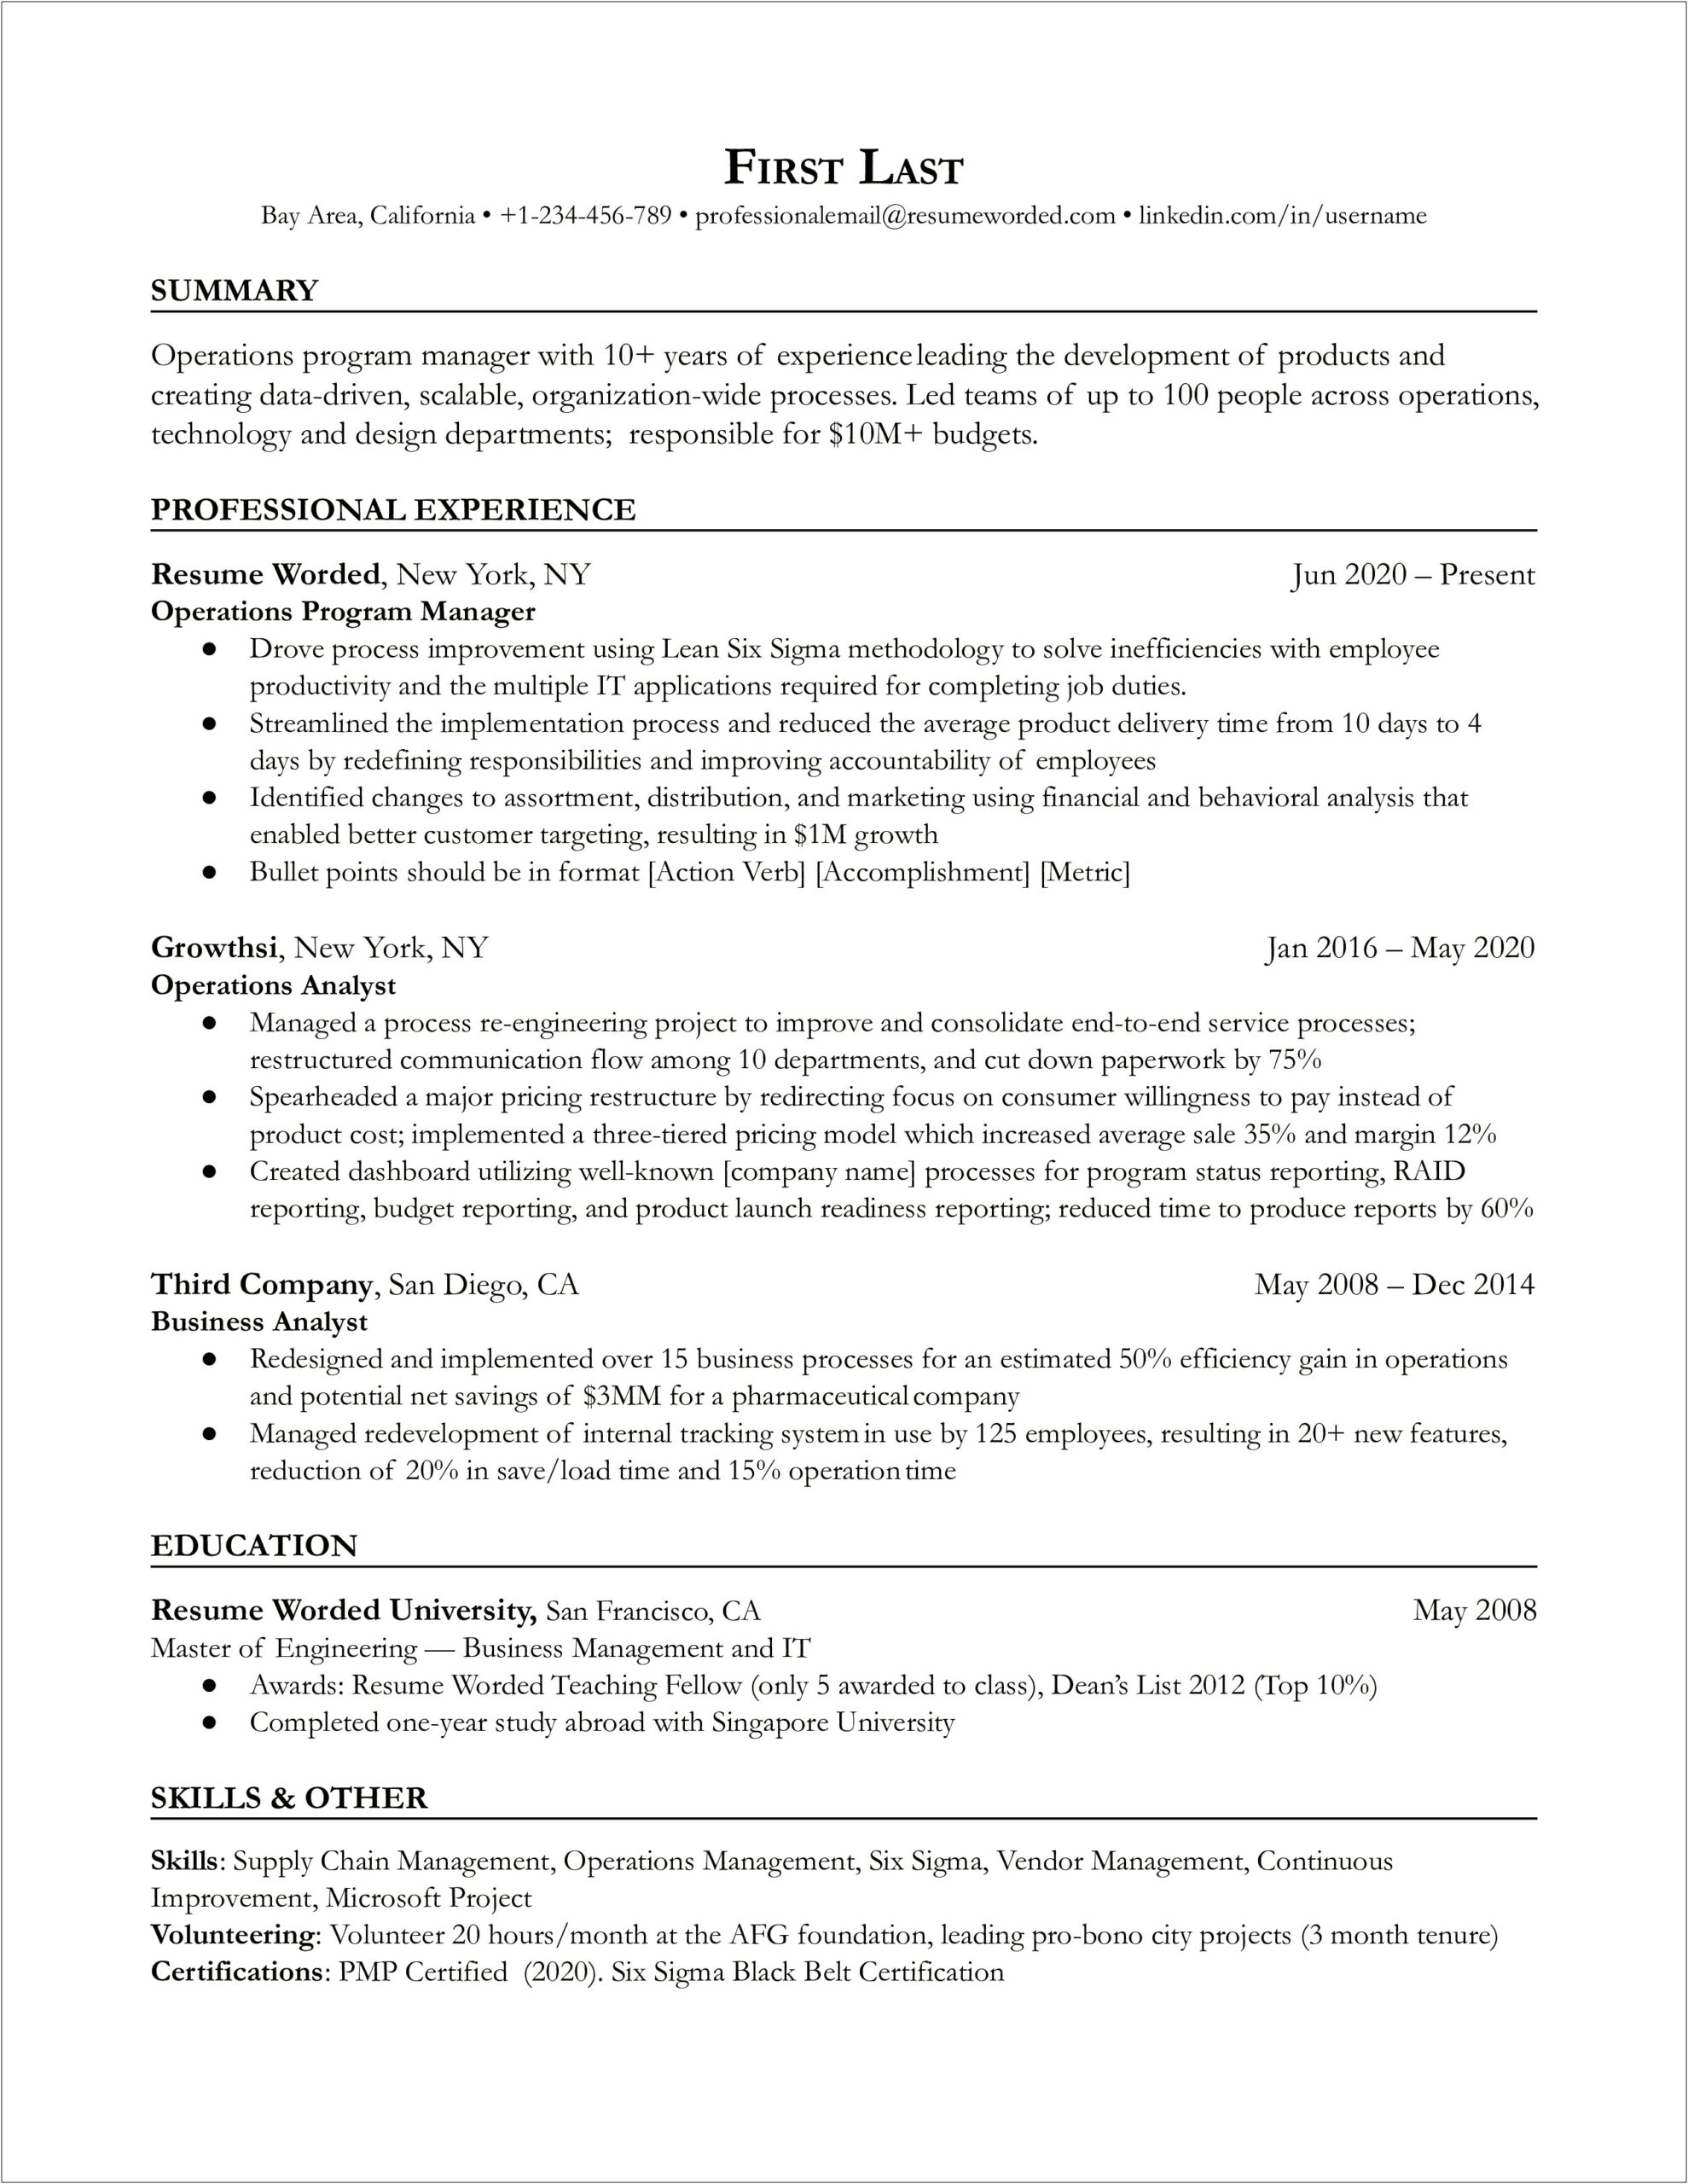 Samples Of Summary For Resume For Project Manger